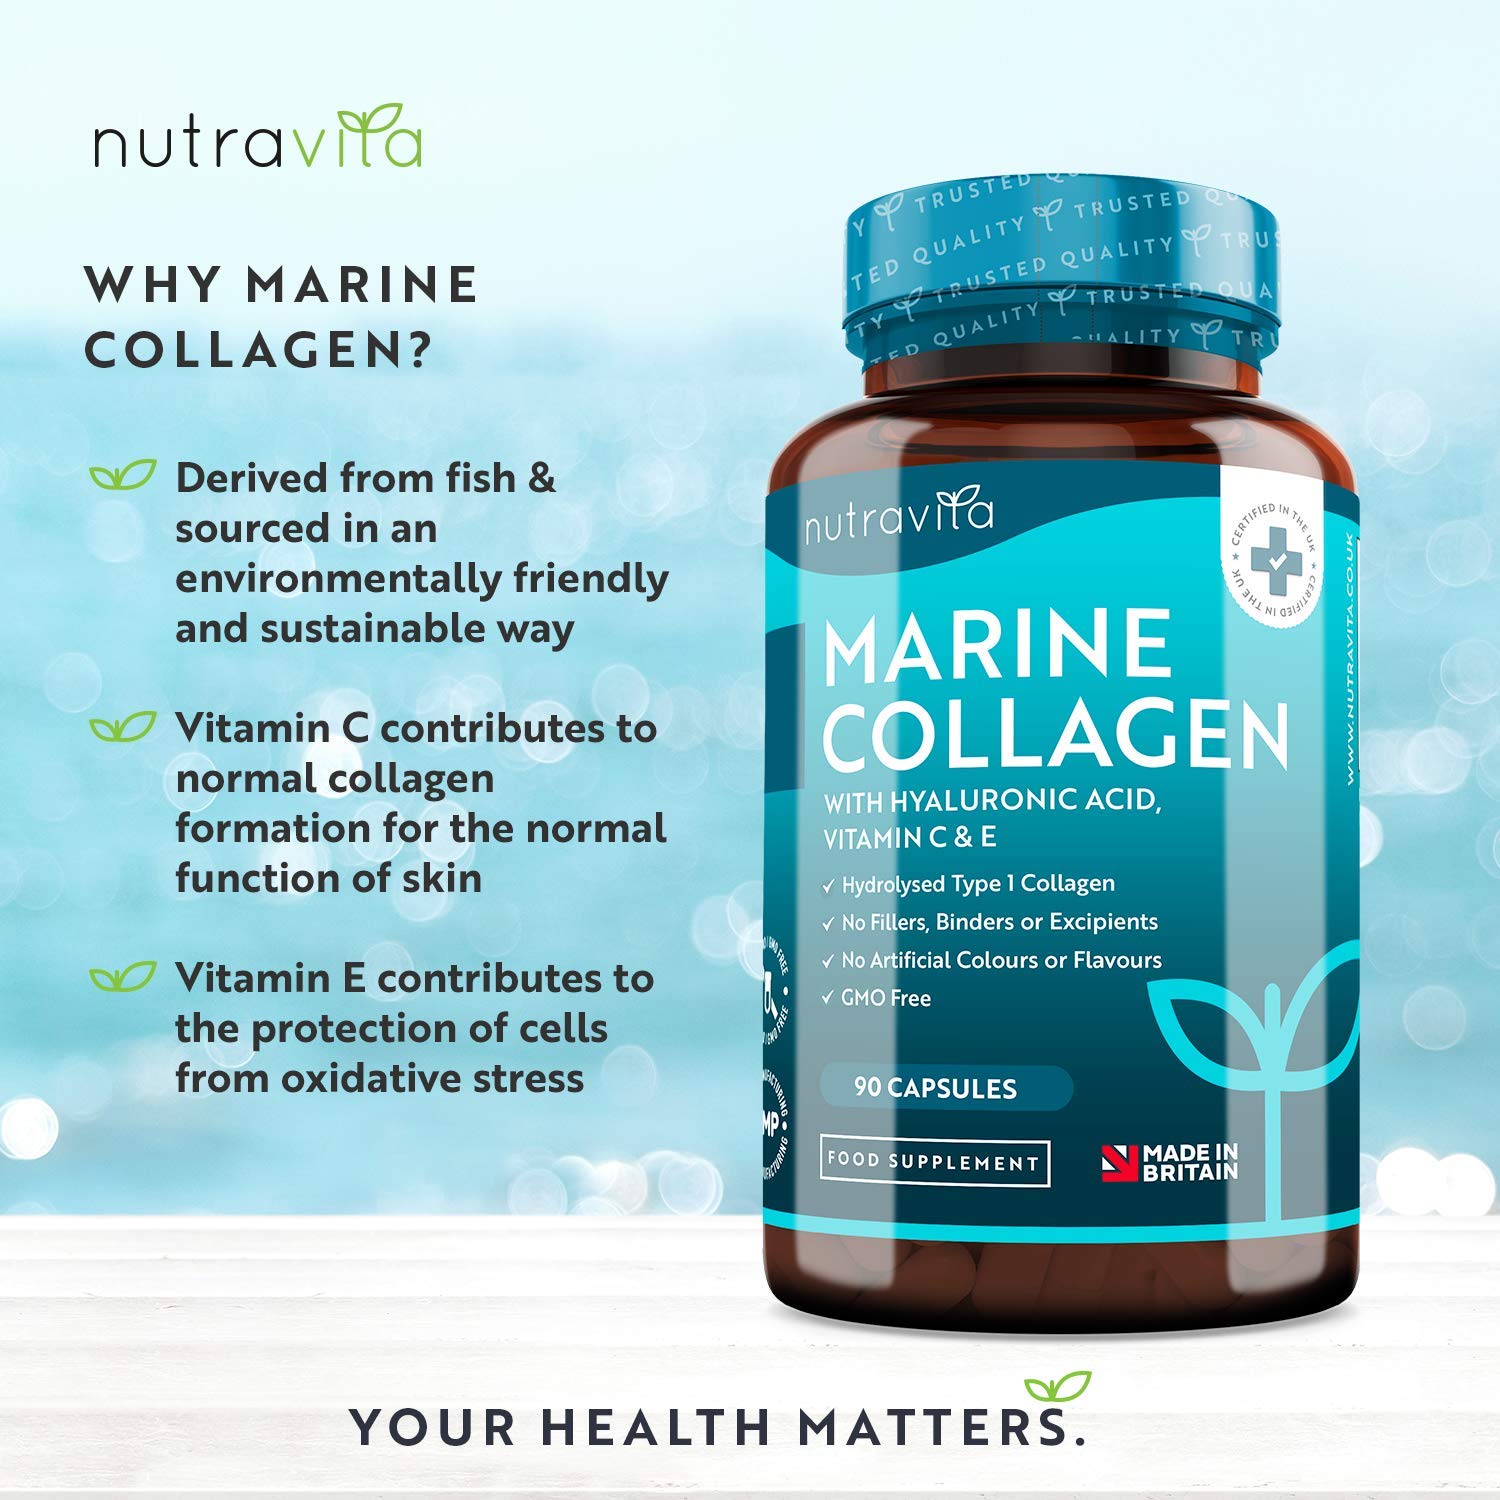 Hydrolysed Marine Collagen with Hyaluronic Acid 1000mg